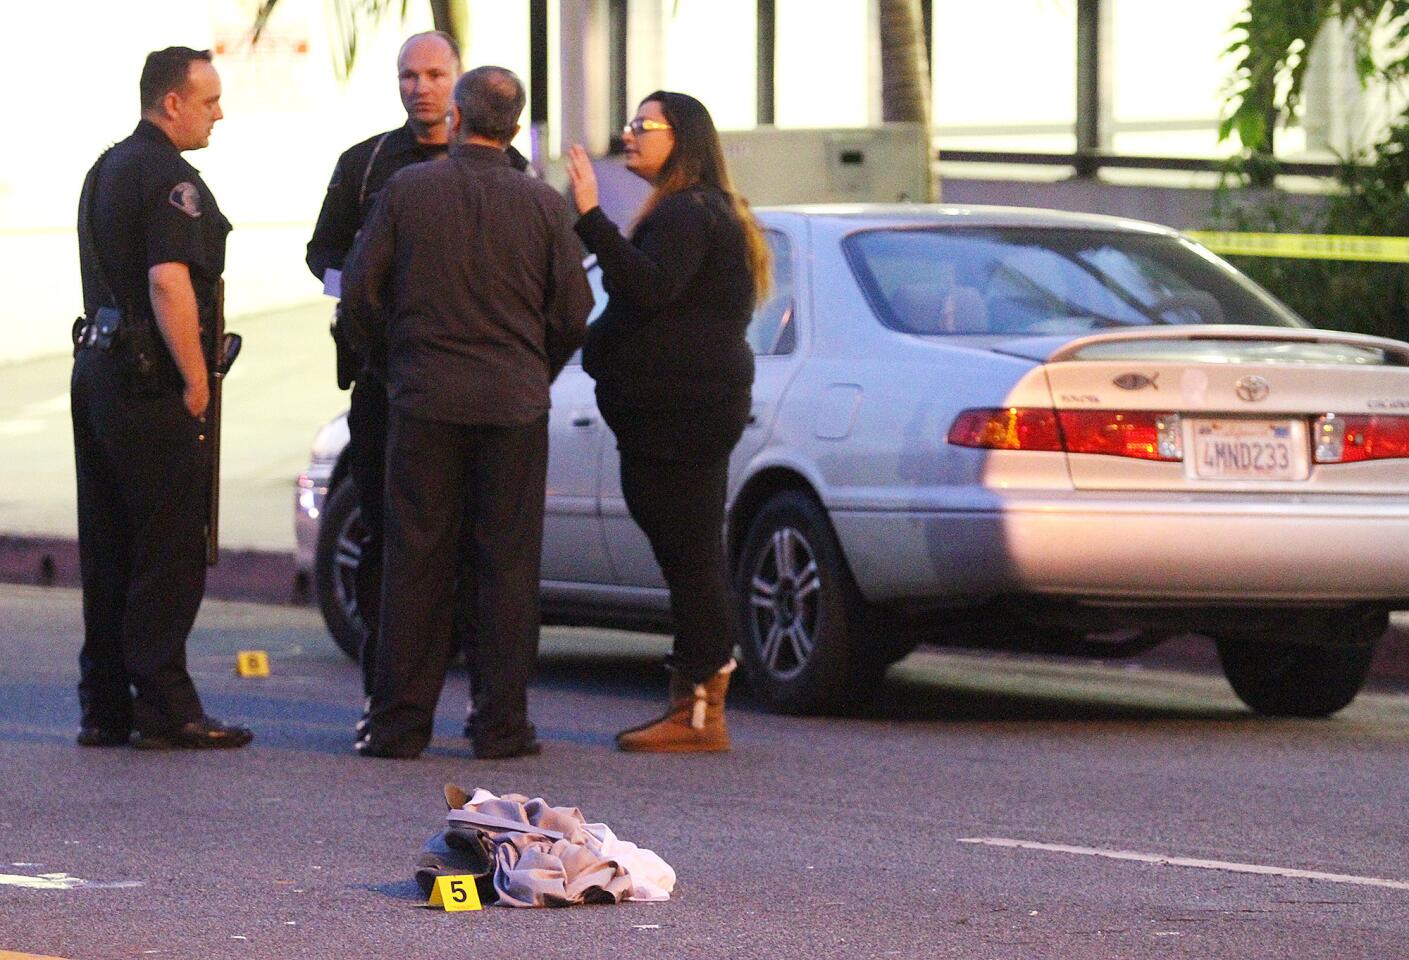 Glendale police officers question a man and a woman next to the alleged car at the scene where a pedestrian was hit by a motorist on the corner of Glenoaks Blvd. and Western Avenue in Glendale on Monday, January 27, 2014. The pedestrian was taken to the hospital with severe head injuries. (Tim Berger/Staff Photographer)